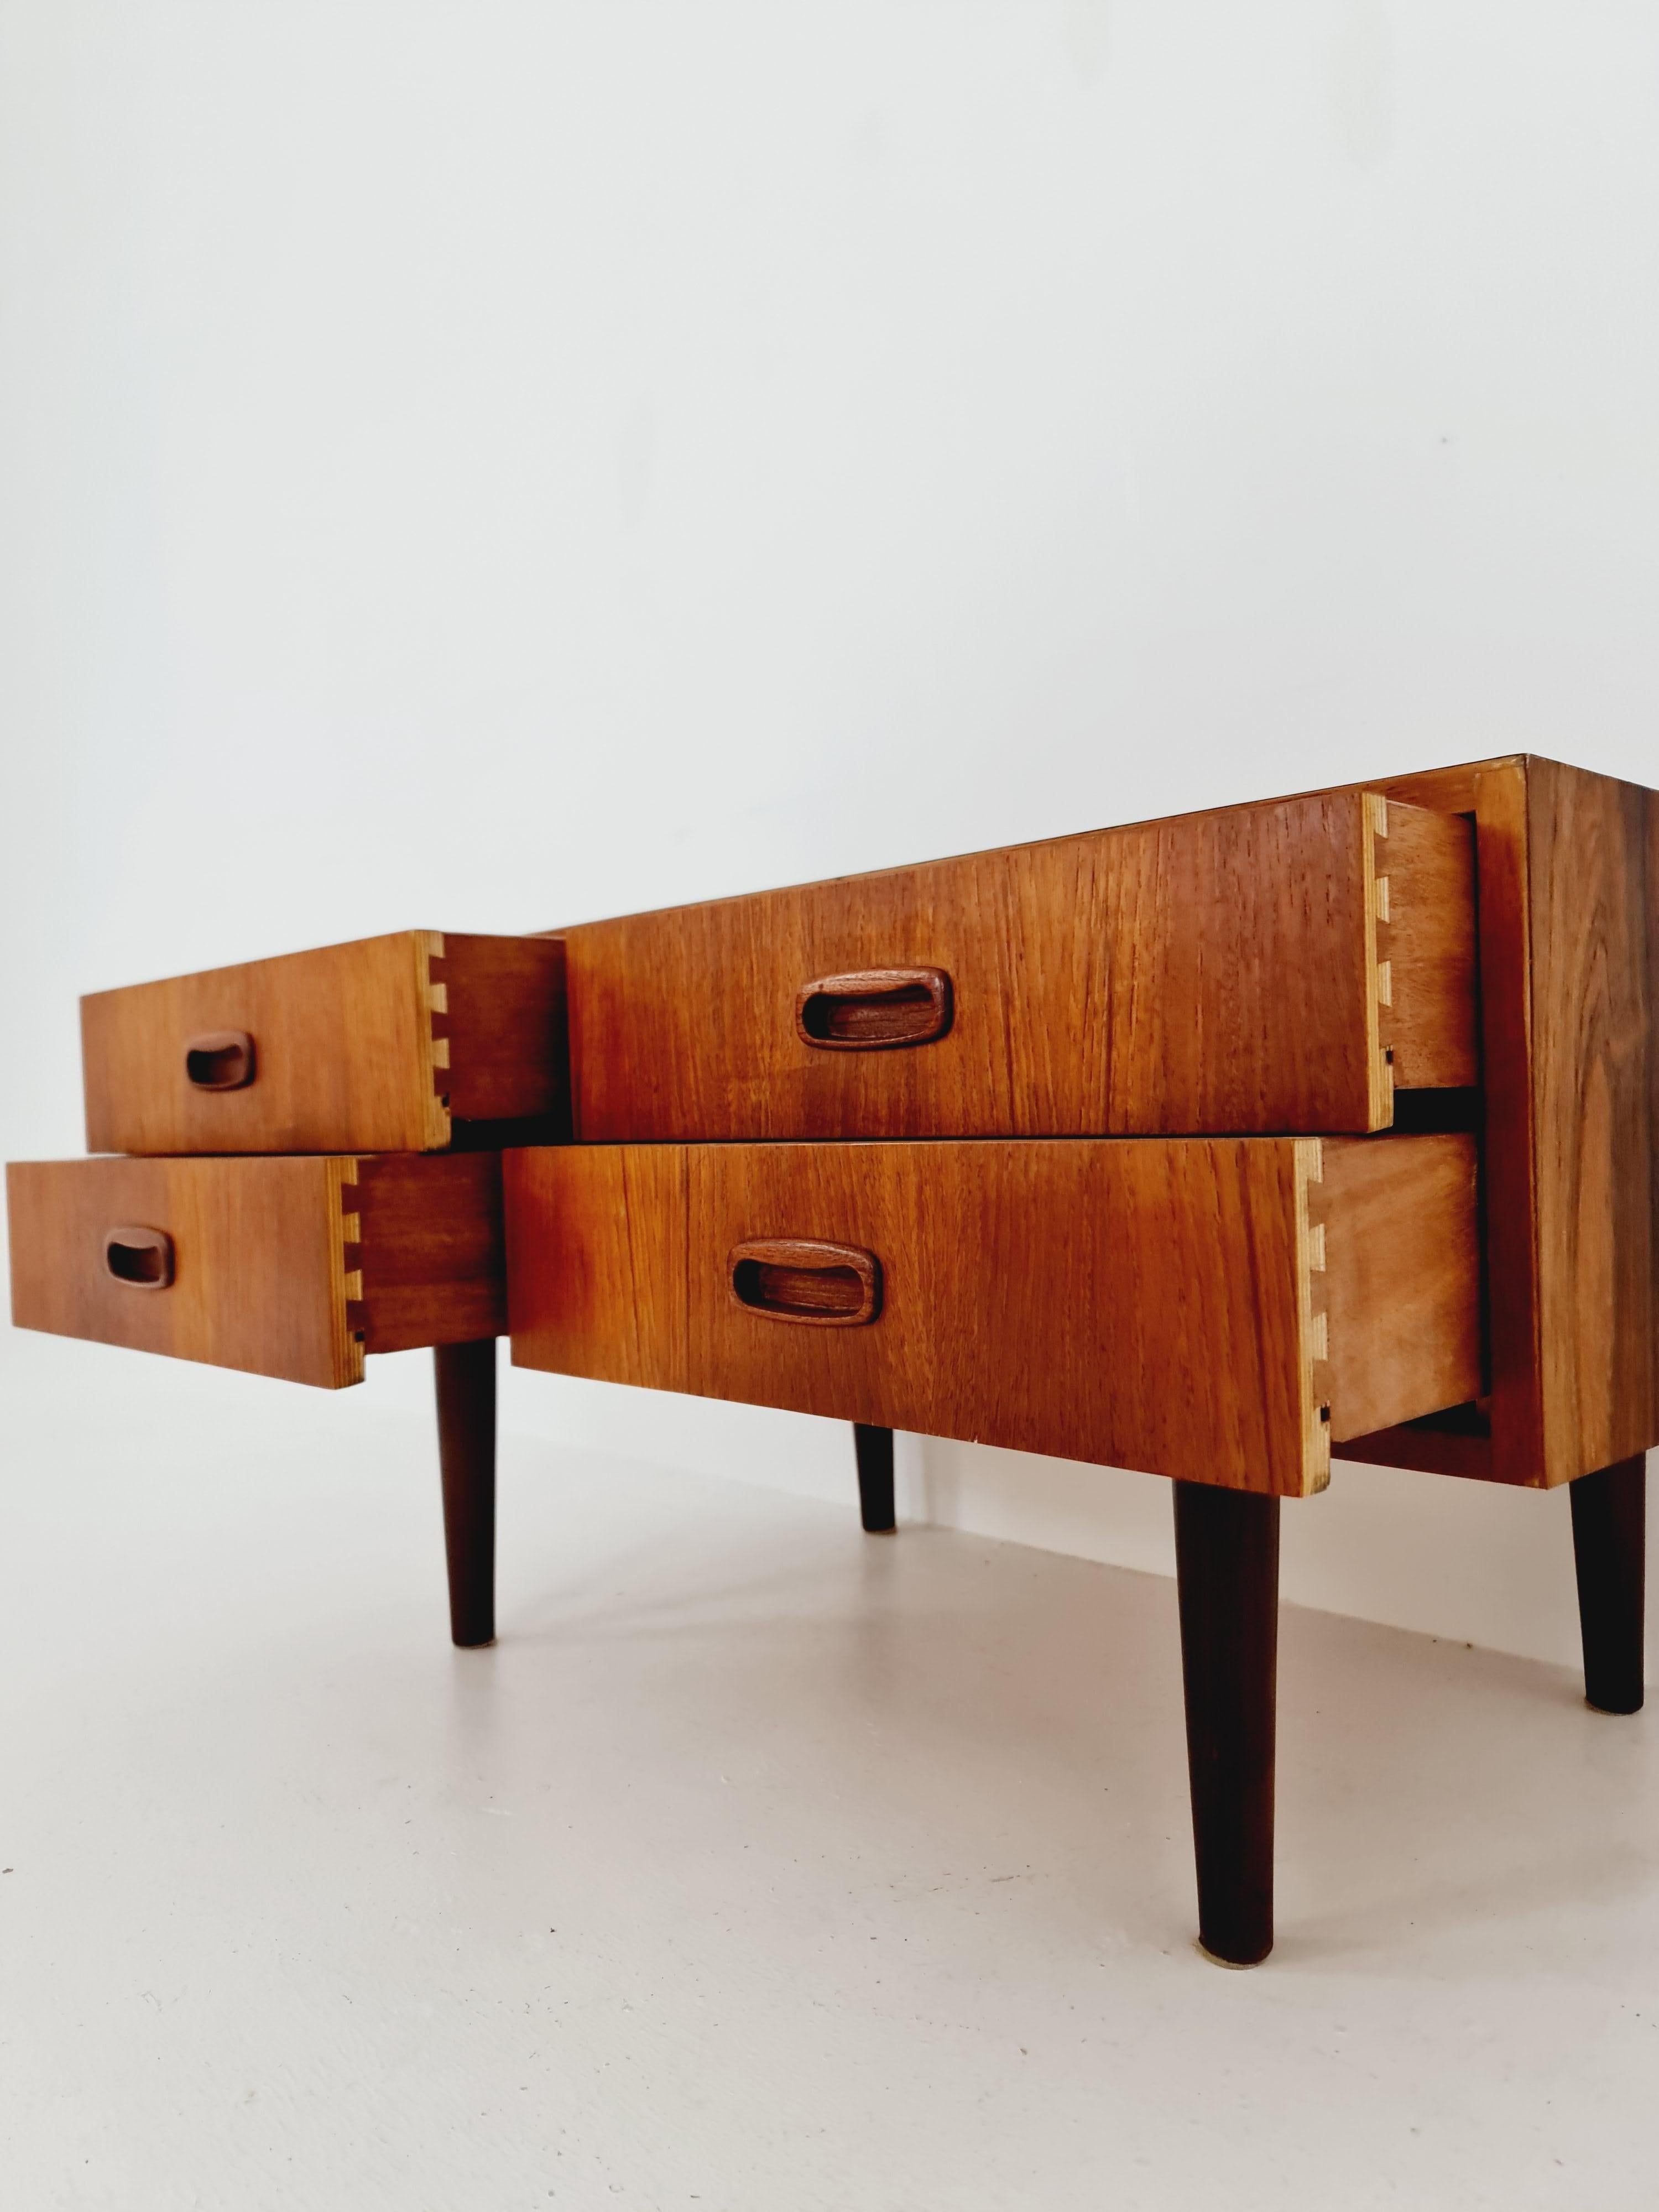 Rare Mid Century Modern Danish rosewood Sideboard with drawers, 1950s In Good Condition For Sale In Gaggenau, DE